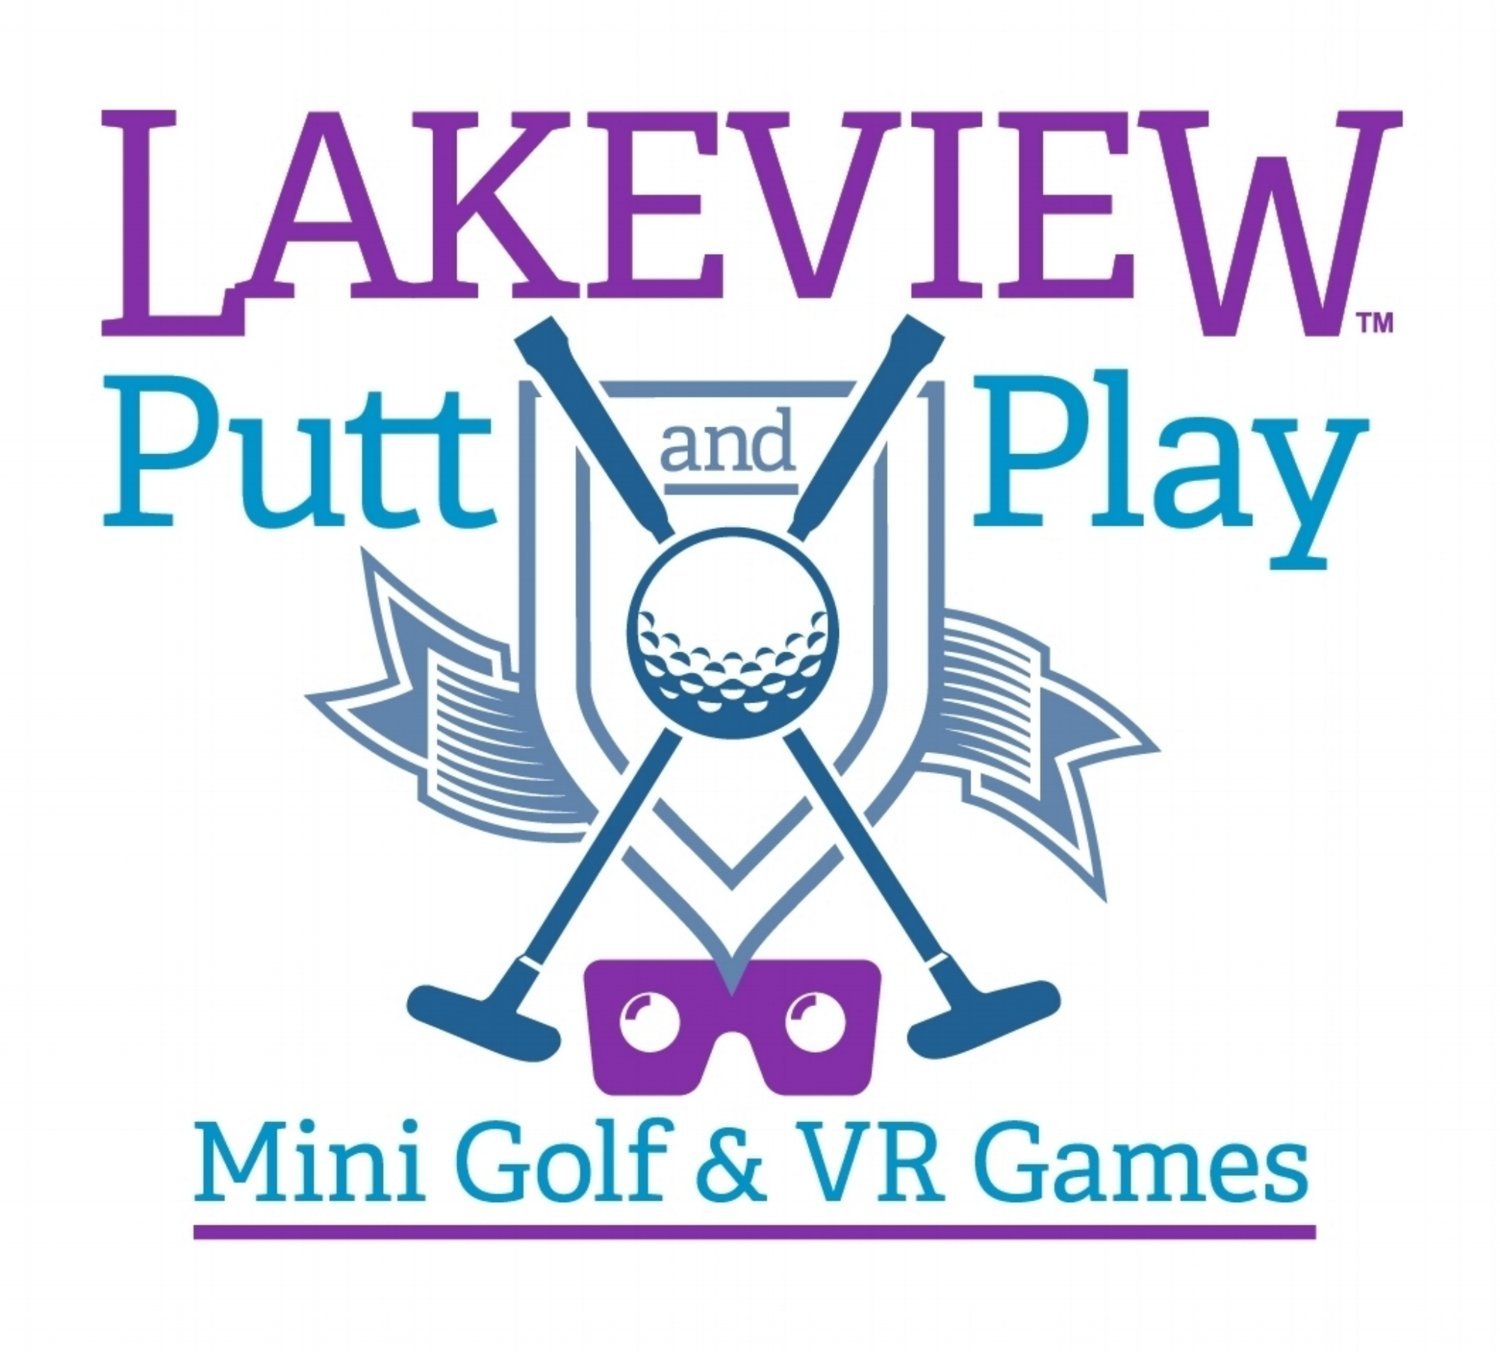 Lakeview Putt and Play.jpg